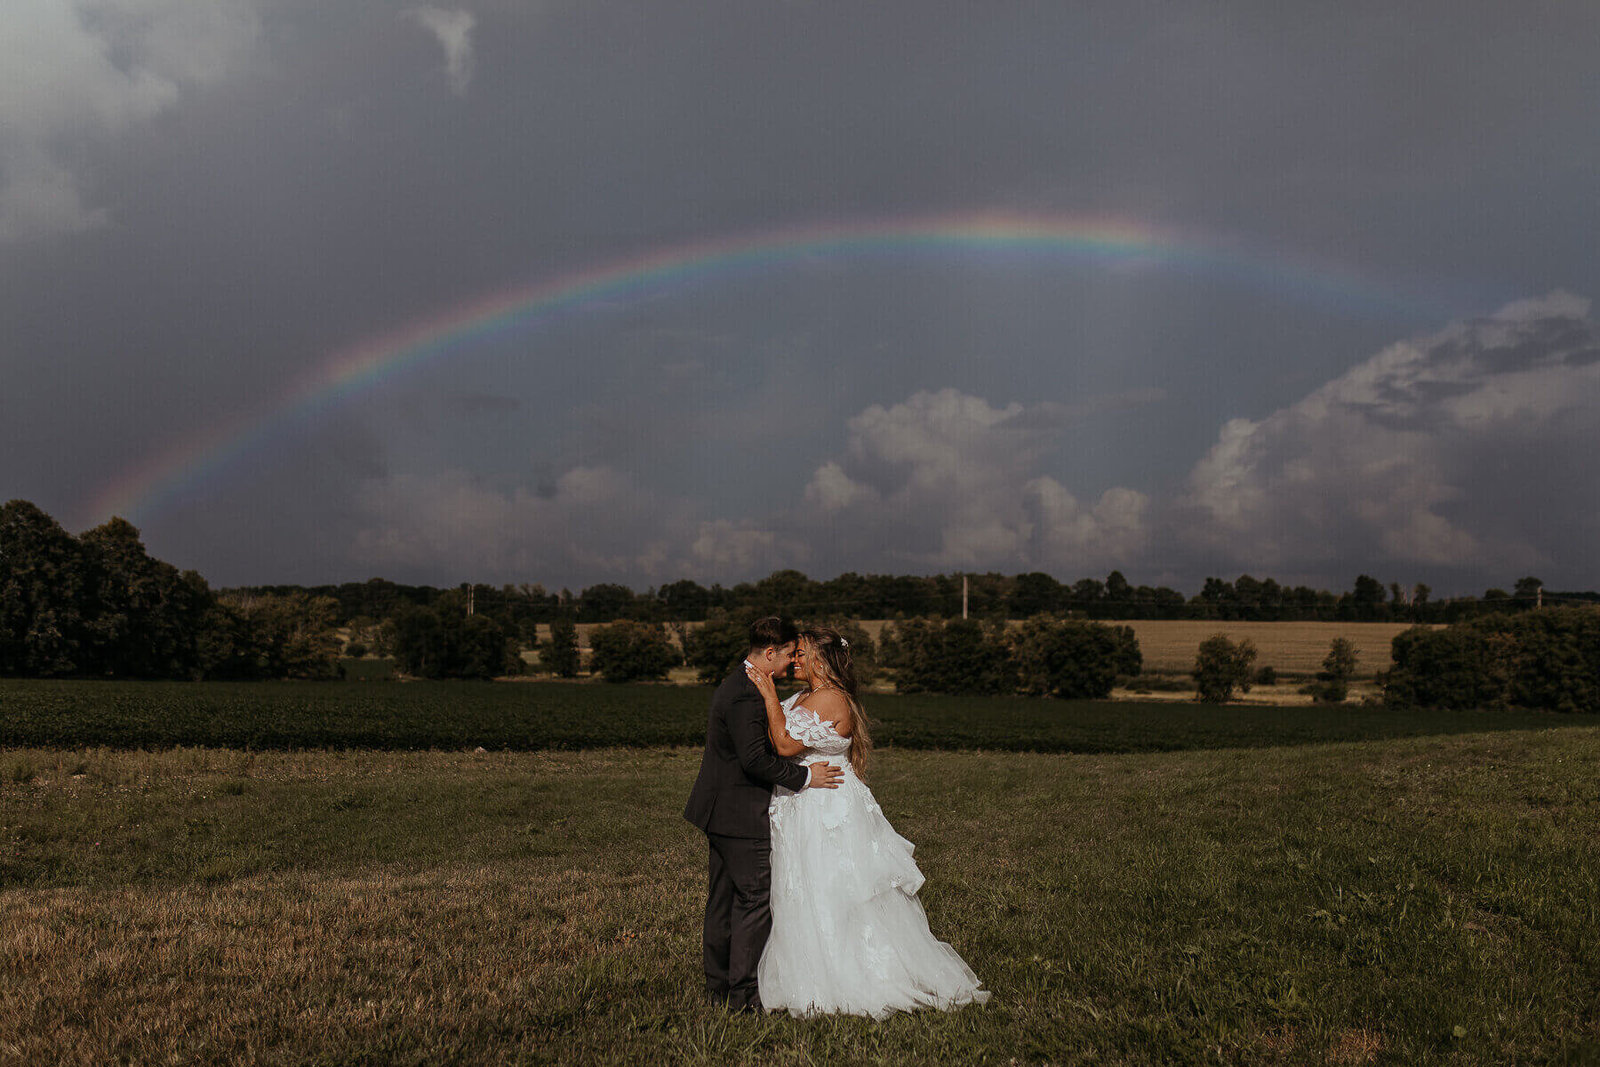 A couple kissing in a field with a rainbow in the background